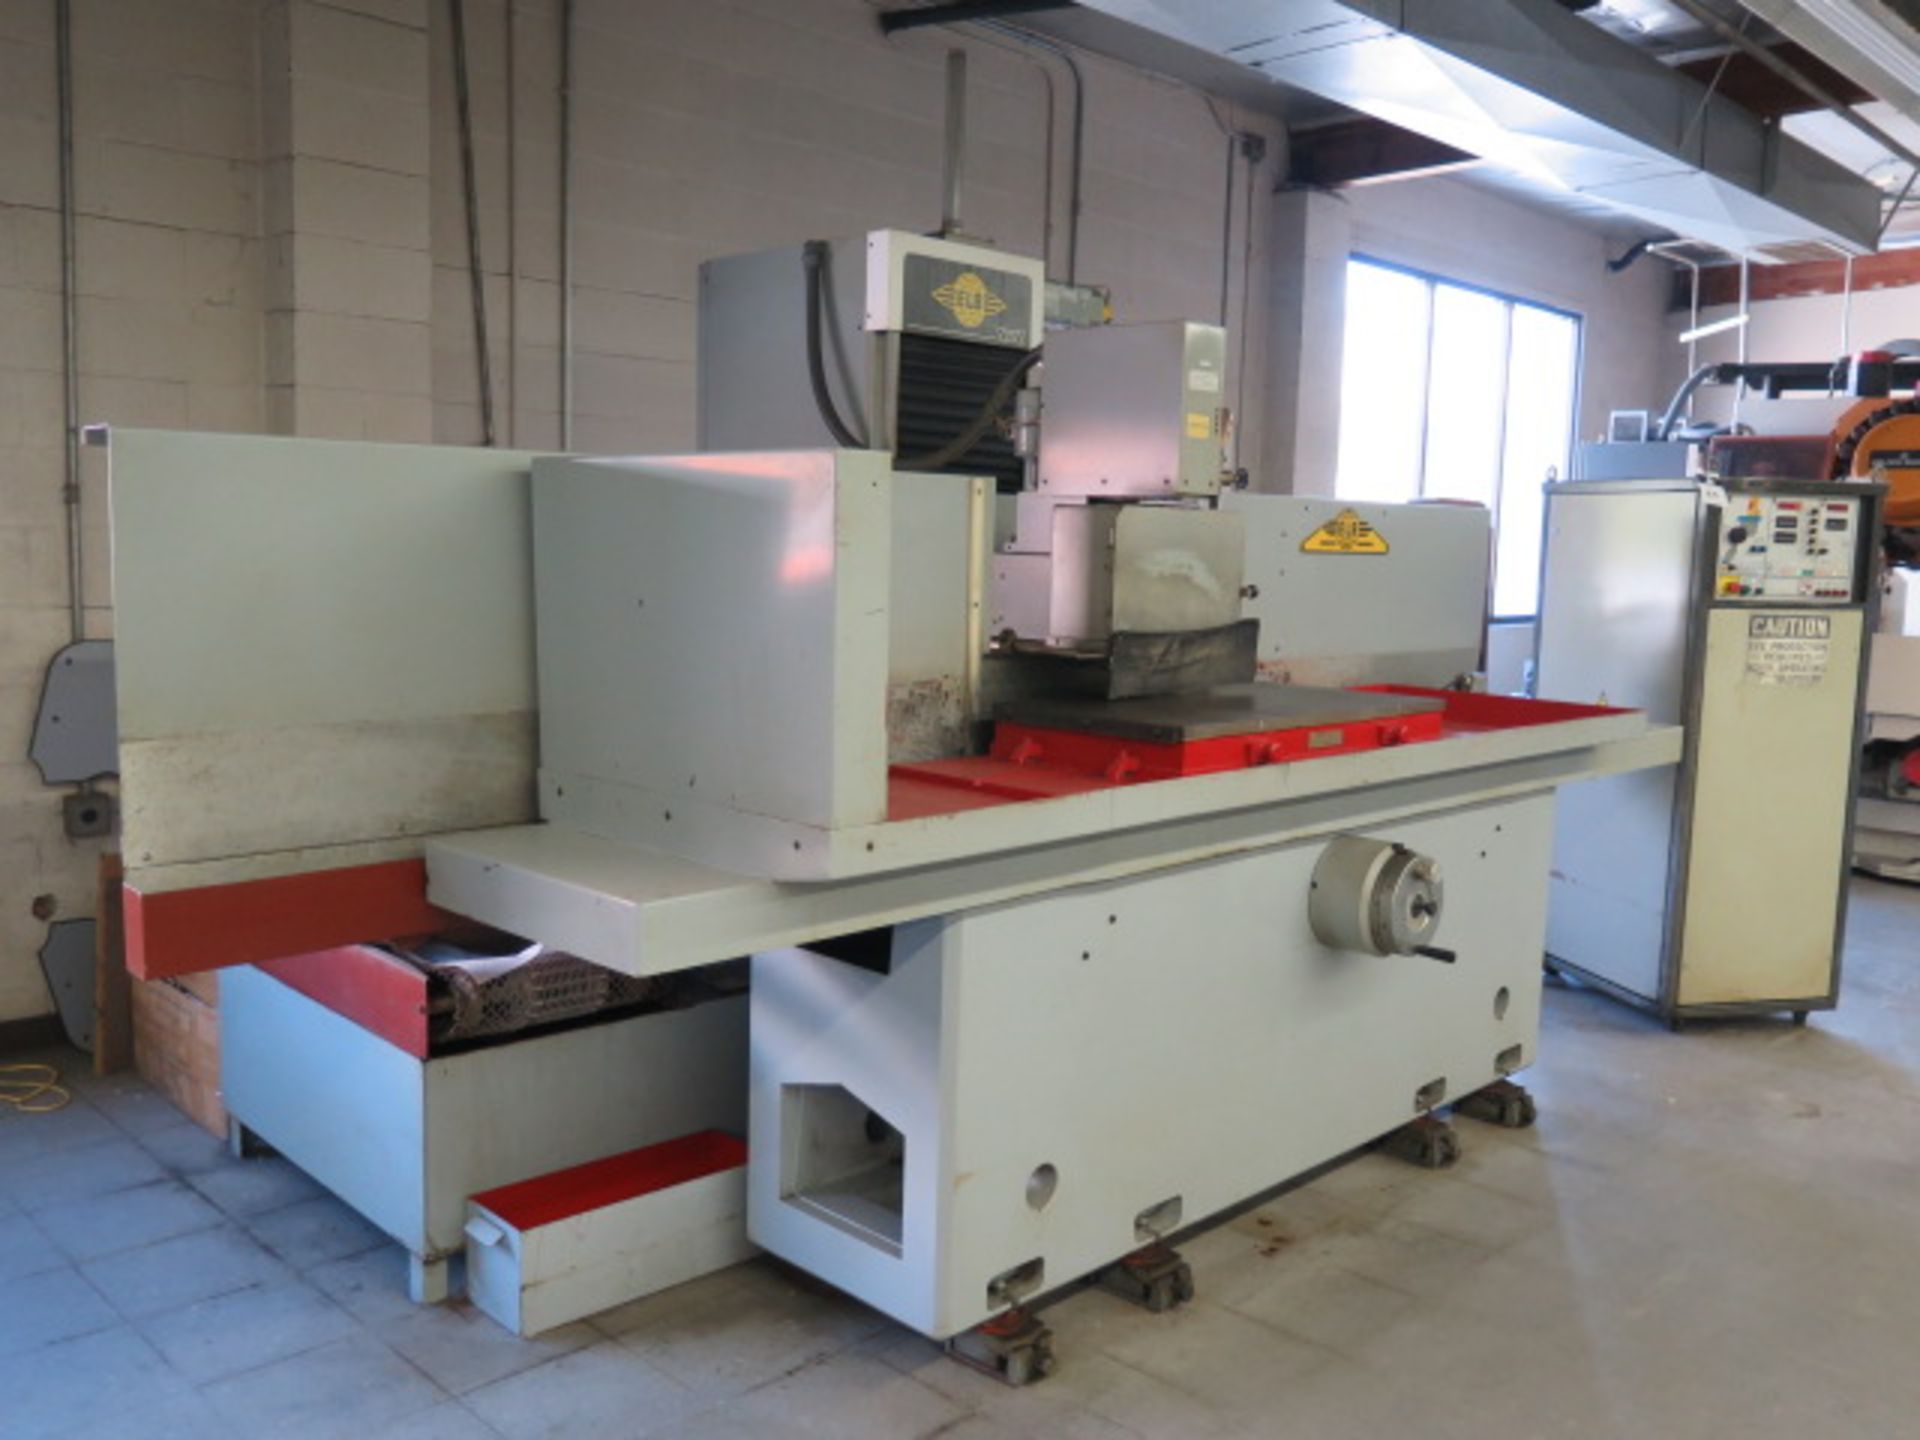 ELB SWBE 010 NPC-K NC 20” x 40” NC Surface Grinder s/n 209030489 w/ ELB Controls, SOLD AS IS - Image 2 of 15